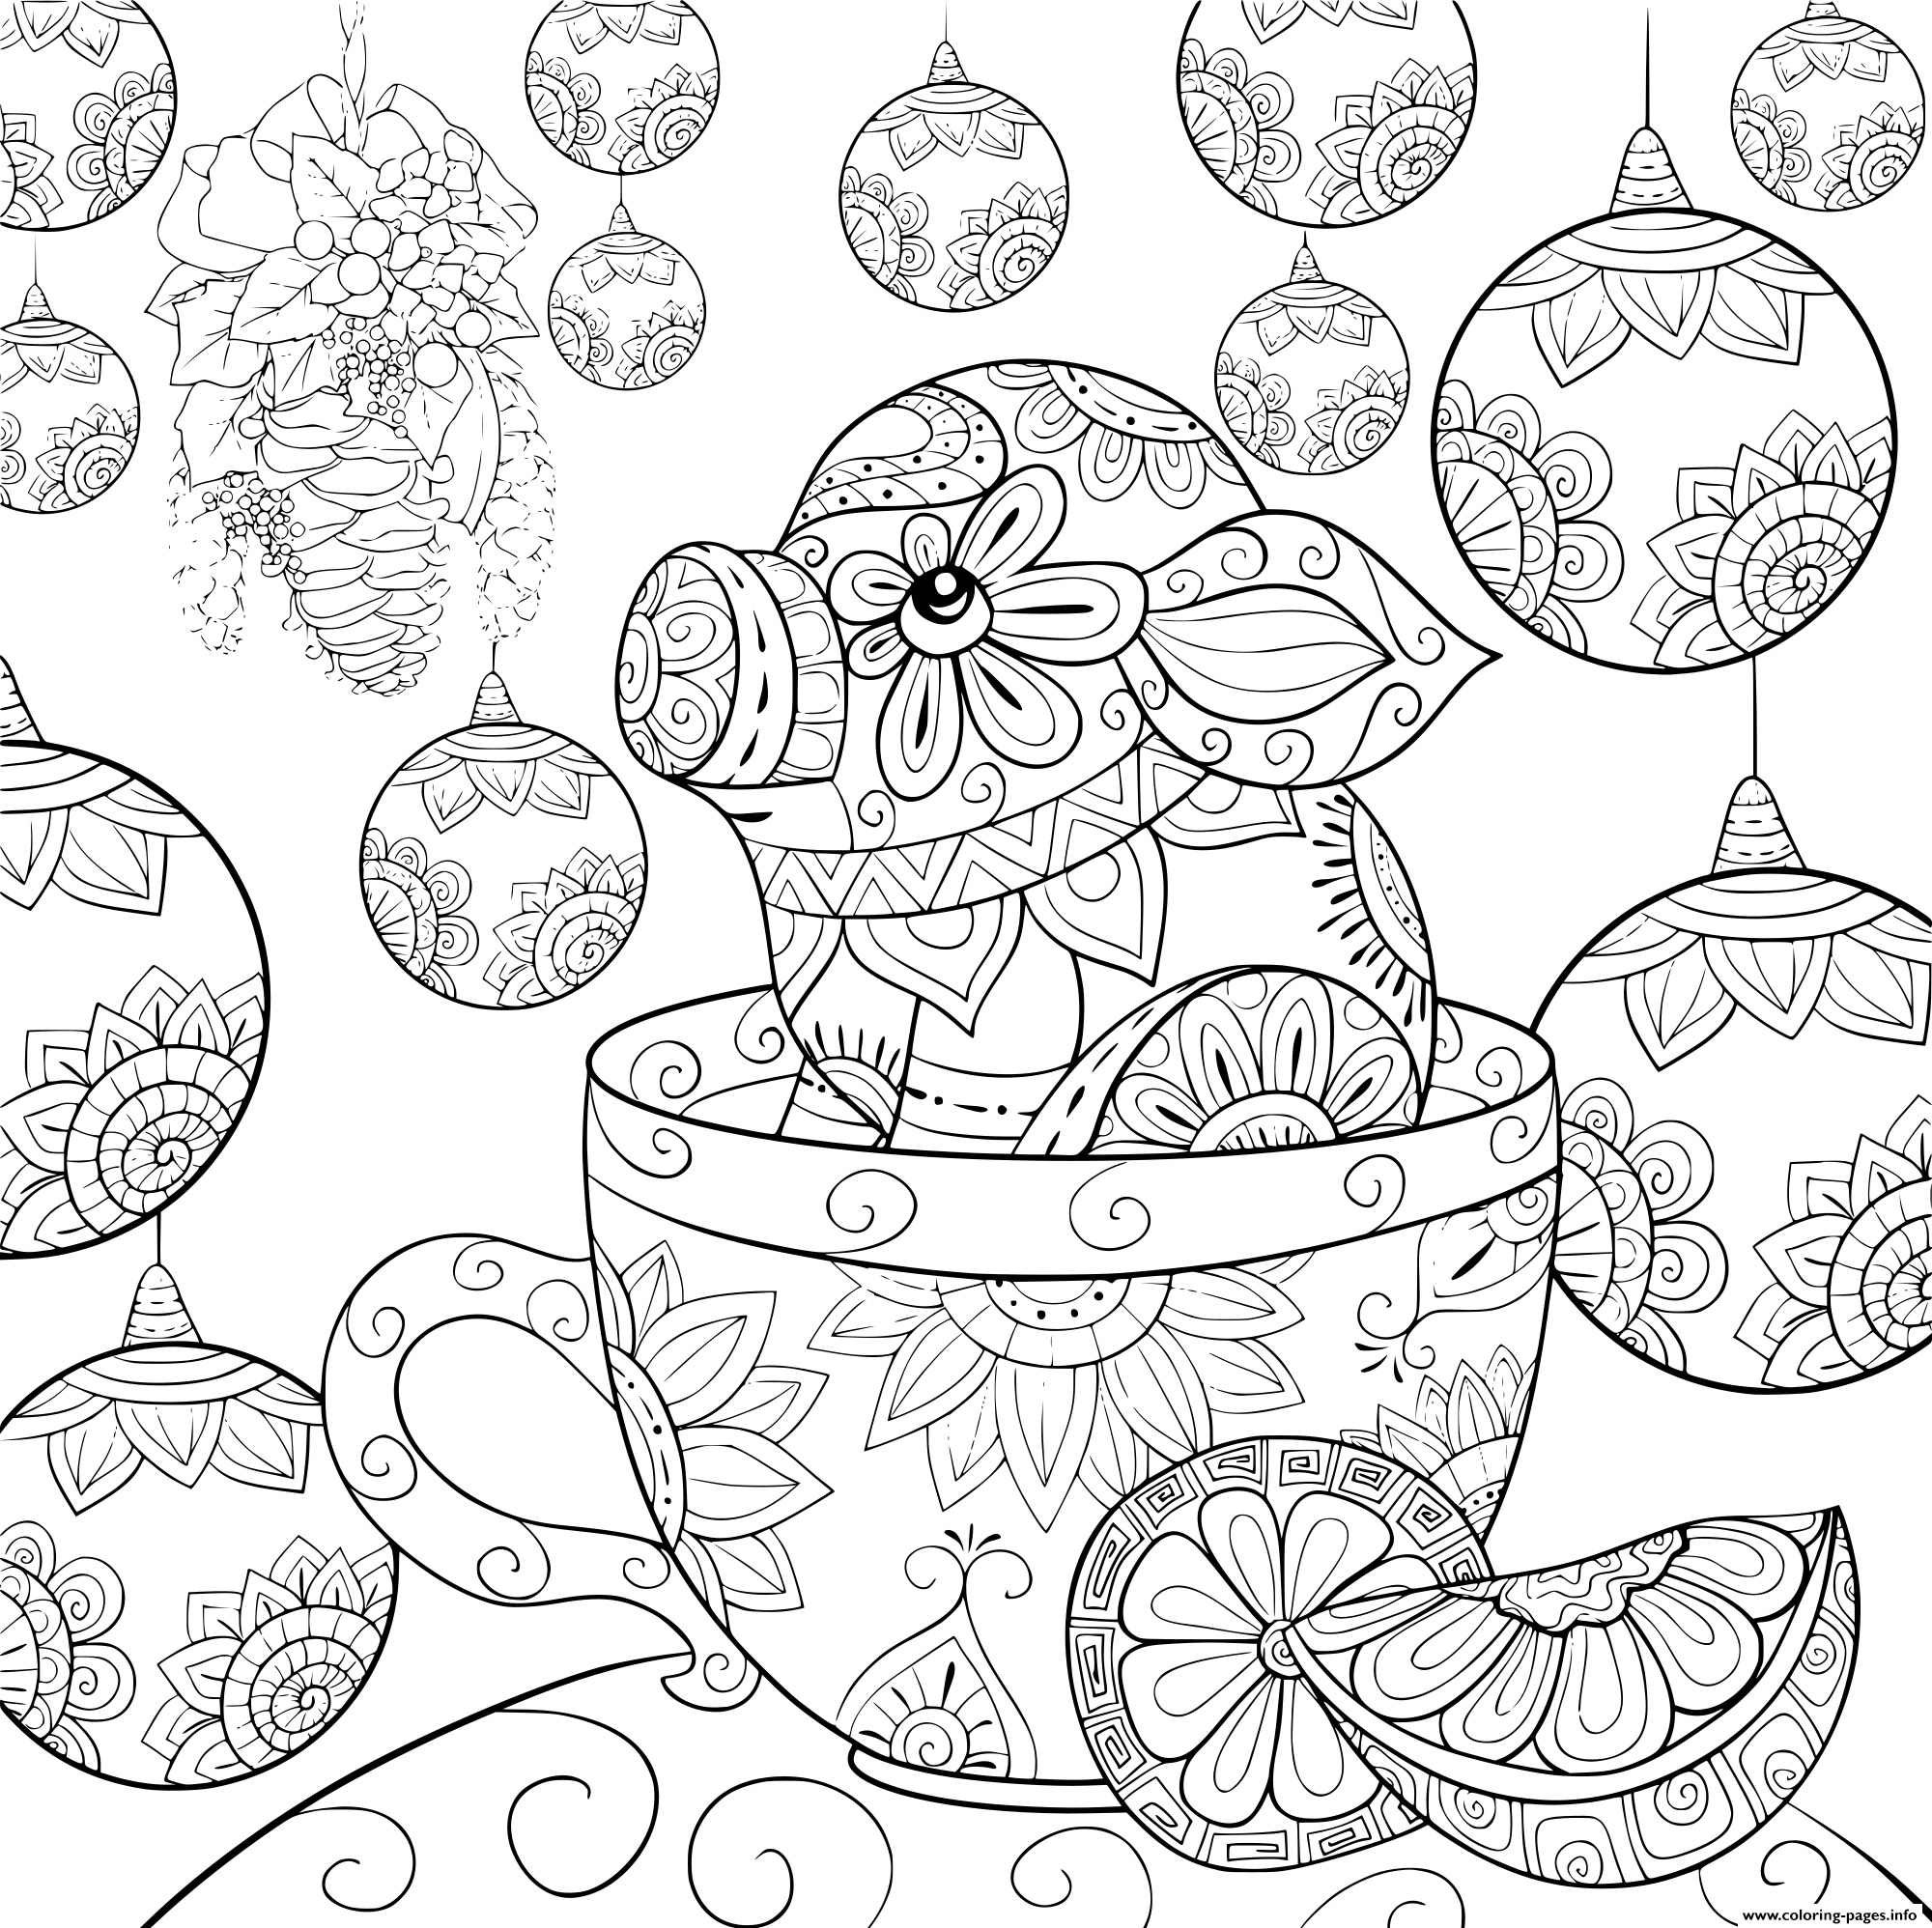 A Cute Little Pig In A Mug On A Christmas Background Coloring Pages